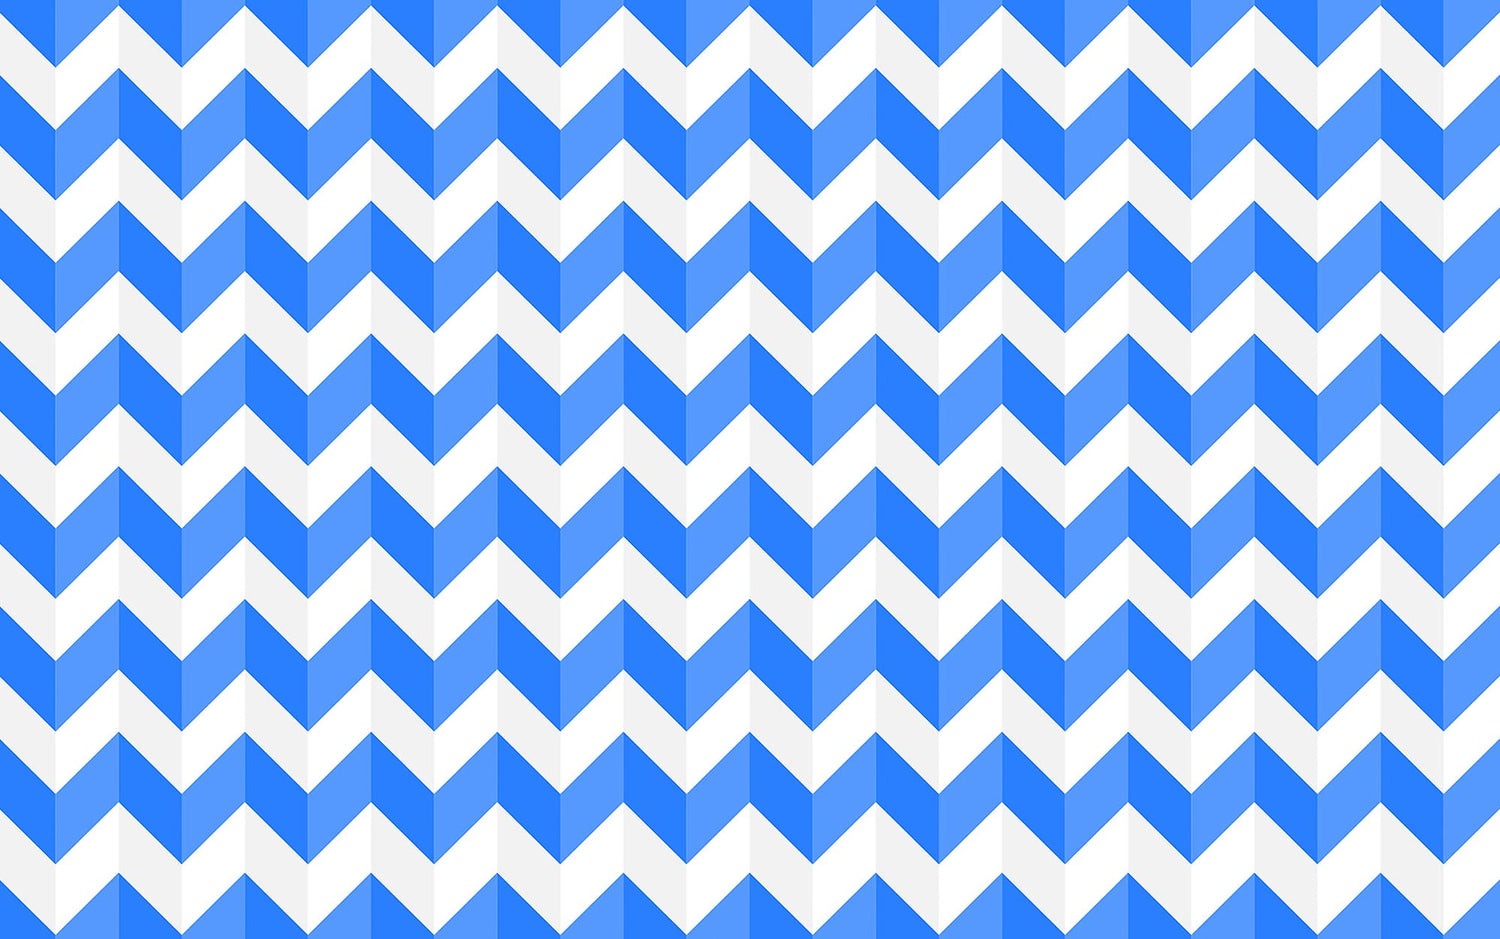 Interior wall with a blue and white chevron pattern mural